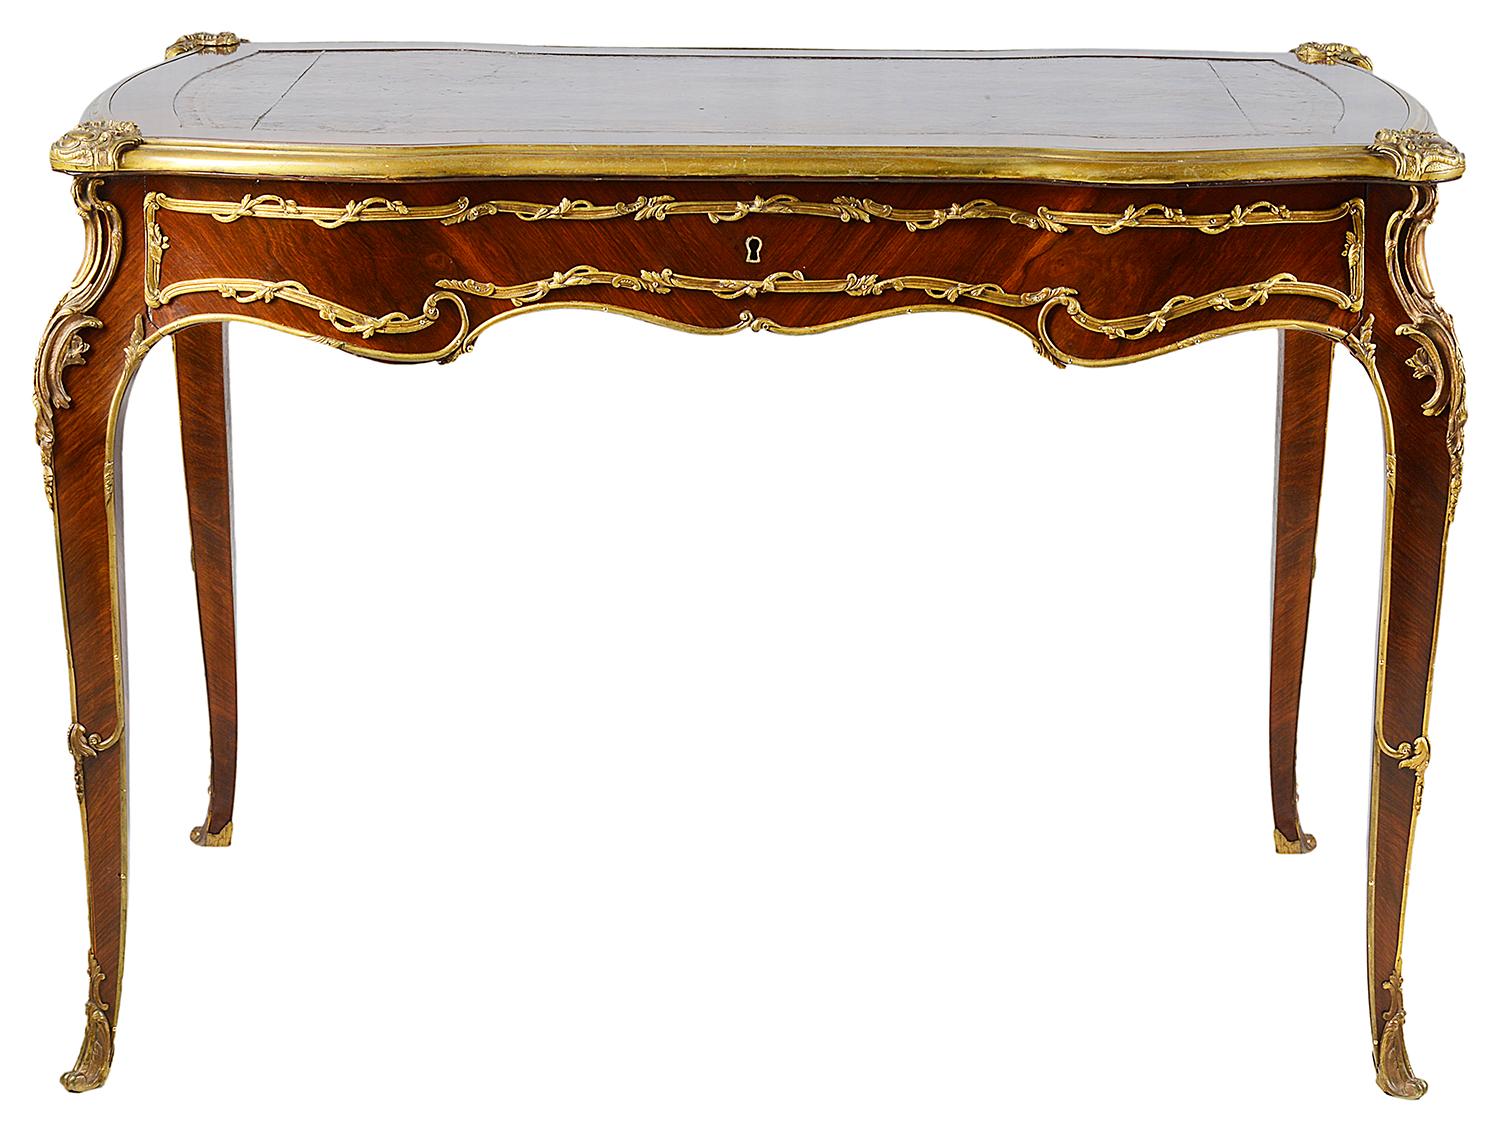 A very good quality French Louis XVI style bureau plat, having an inset leather top, gilded ormolu mounts, a single frieze drawer, raised on elegant cabriole legs terminating in scrolling gilded ormolu feet.
In the style of 'Linke'.